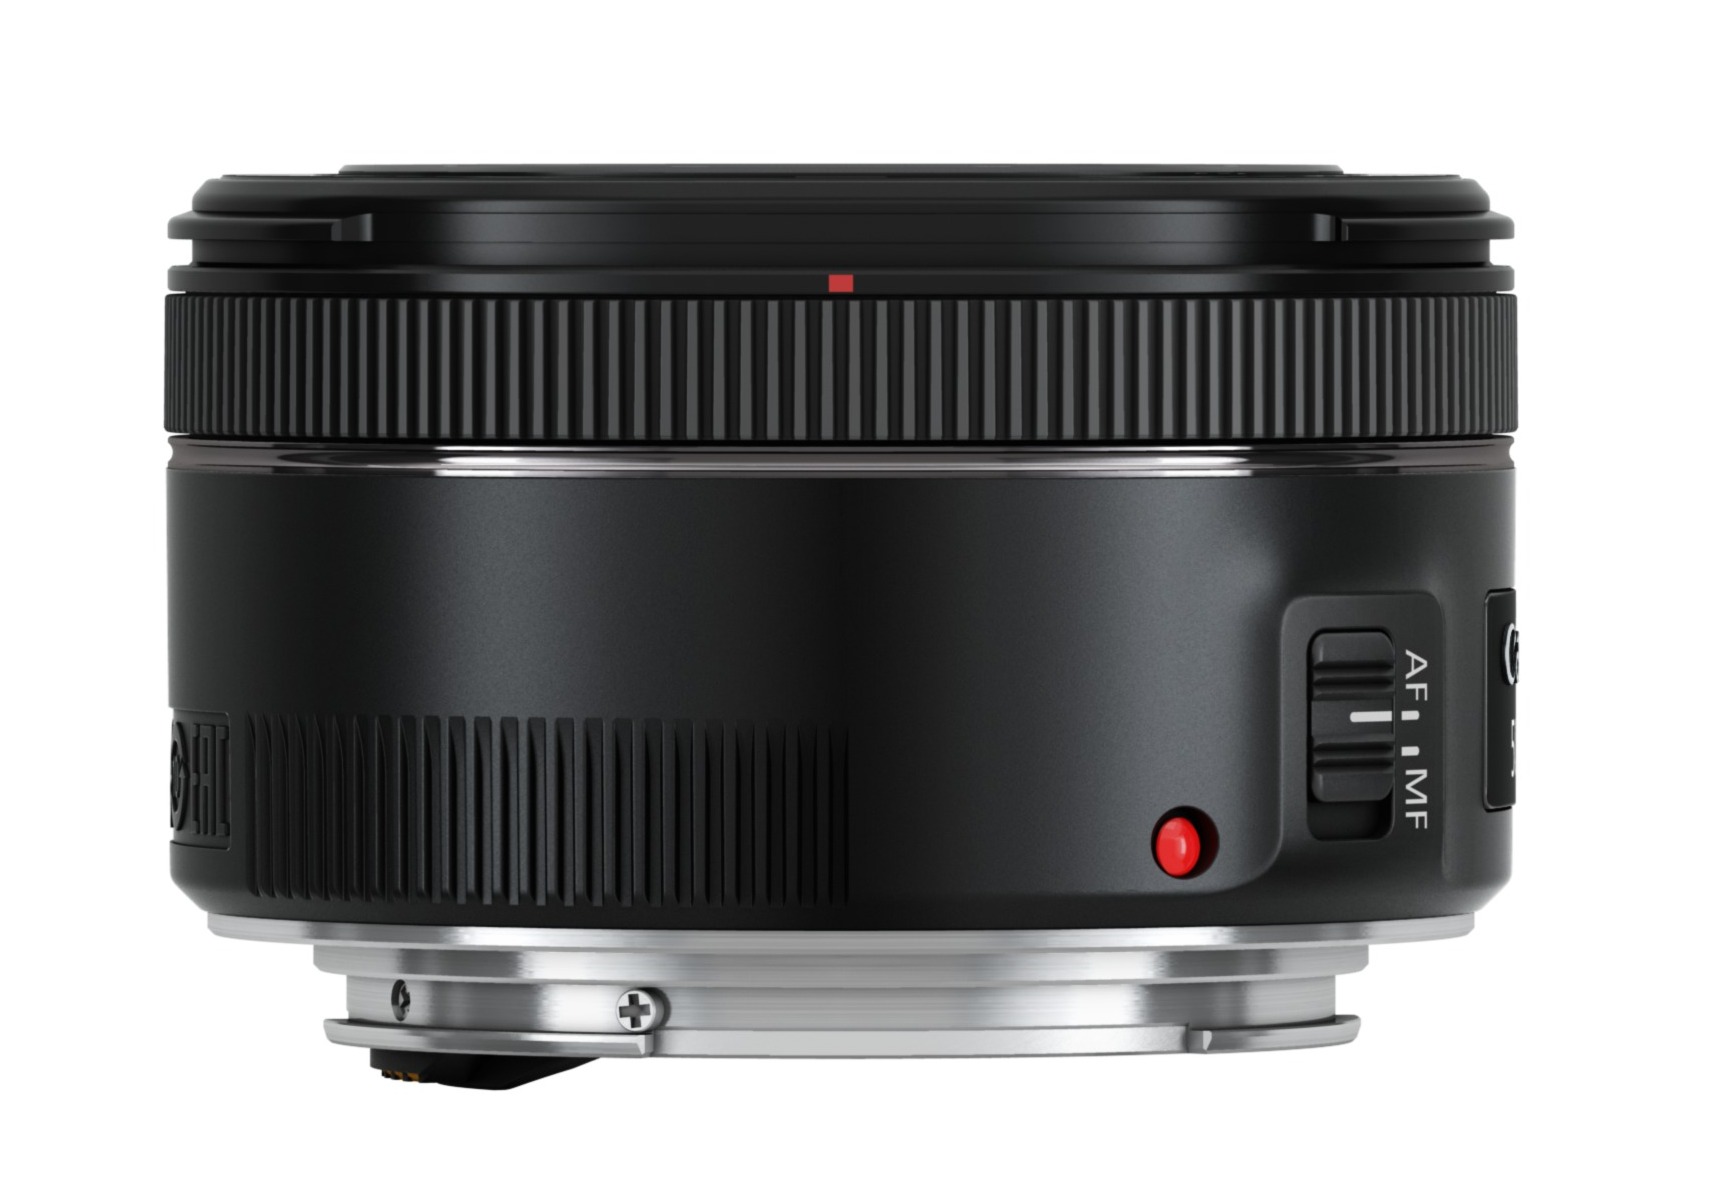 EF 50mm f1.8 STM_Side_switch_without_cap.jpg